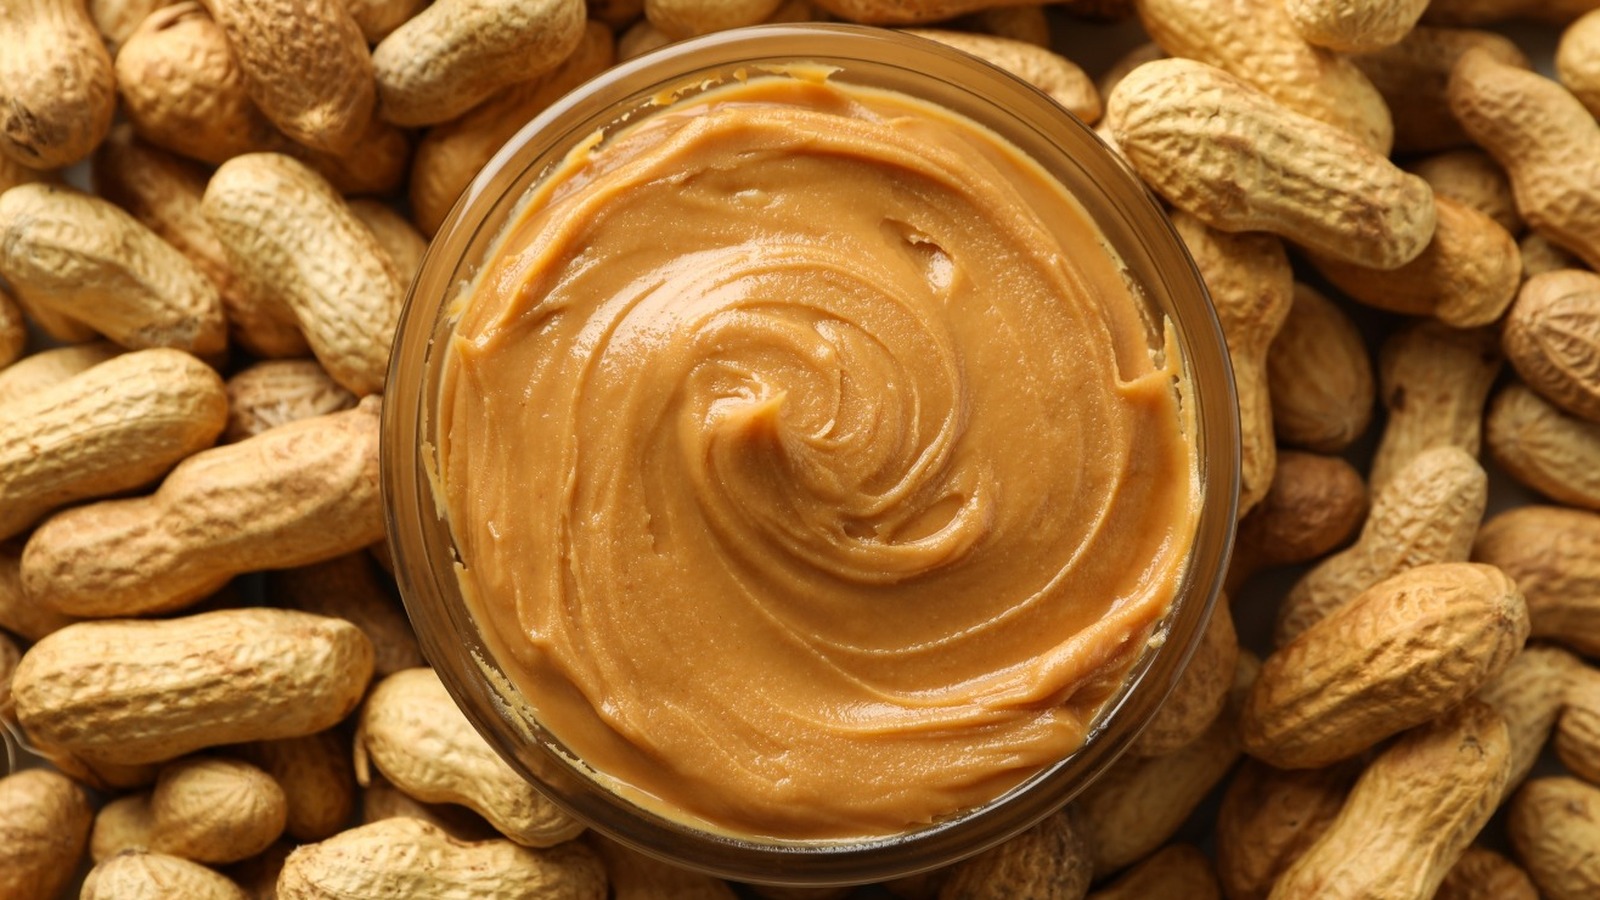 what-s-the-difference-between-jif-peanut-butter-and-skippy-peanut-butter